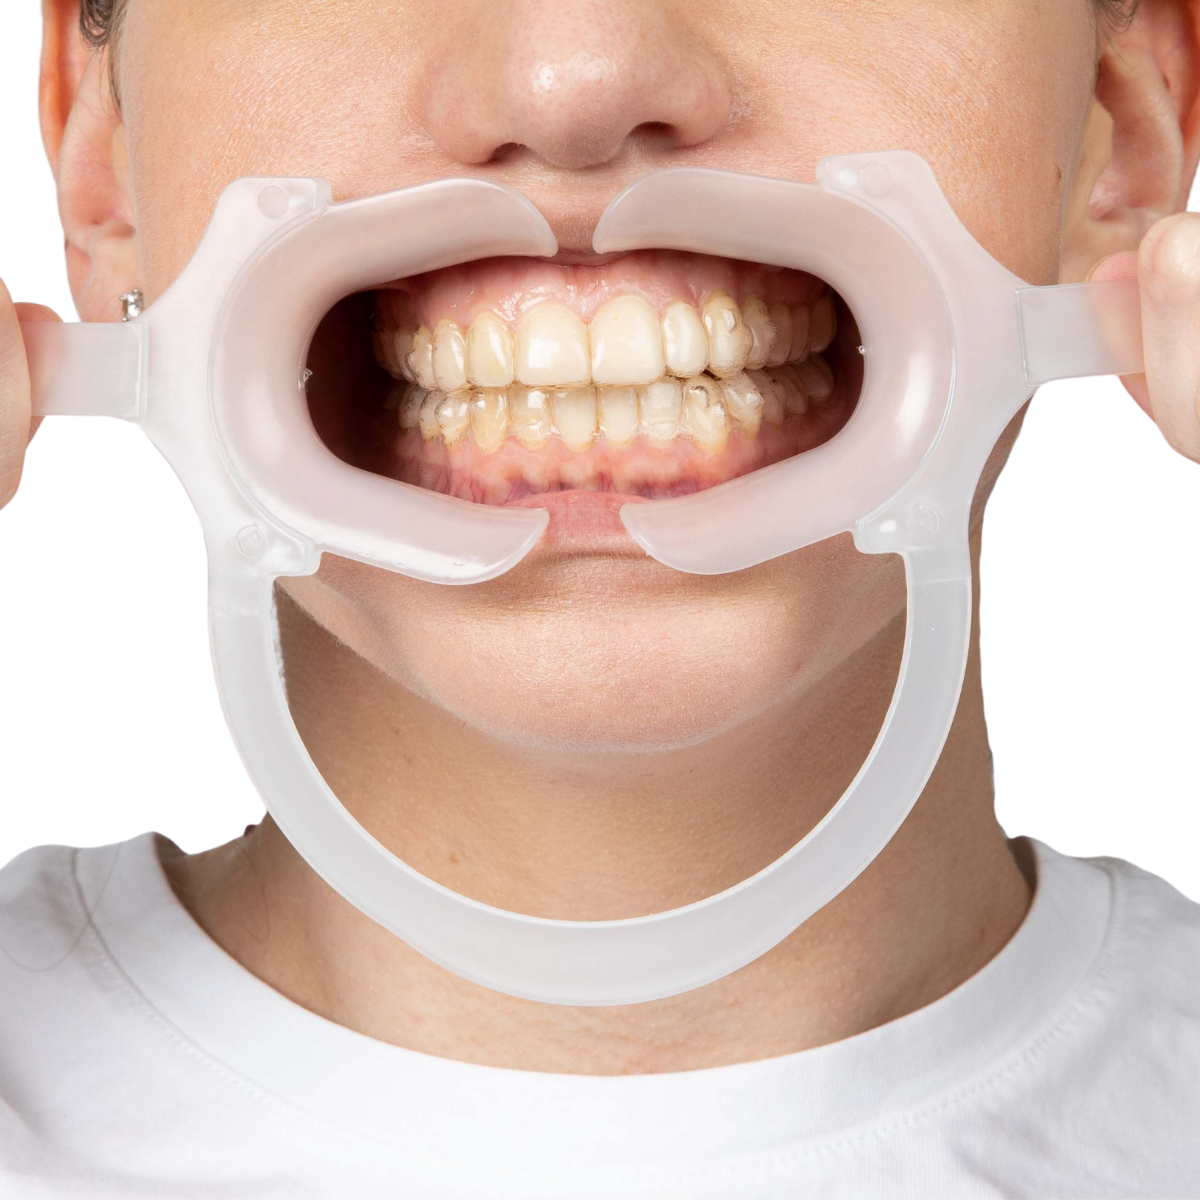 Hands Free Classic Retractors in mouth